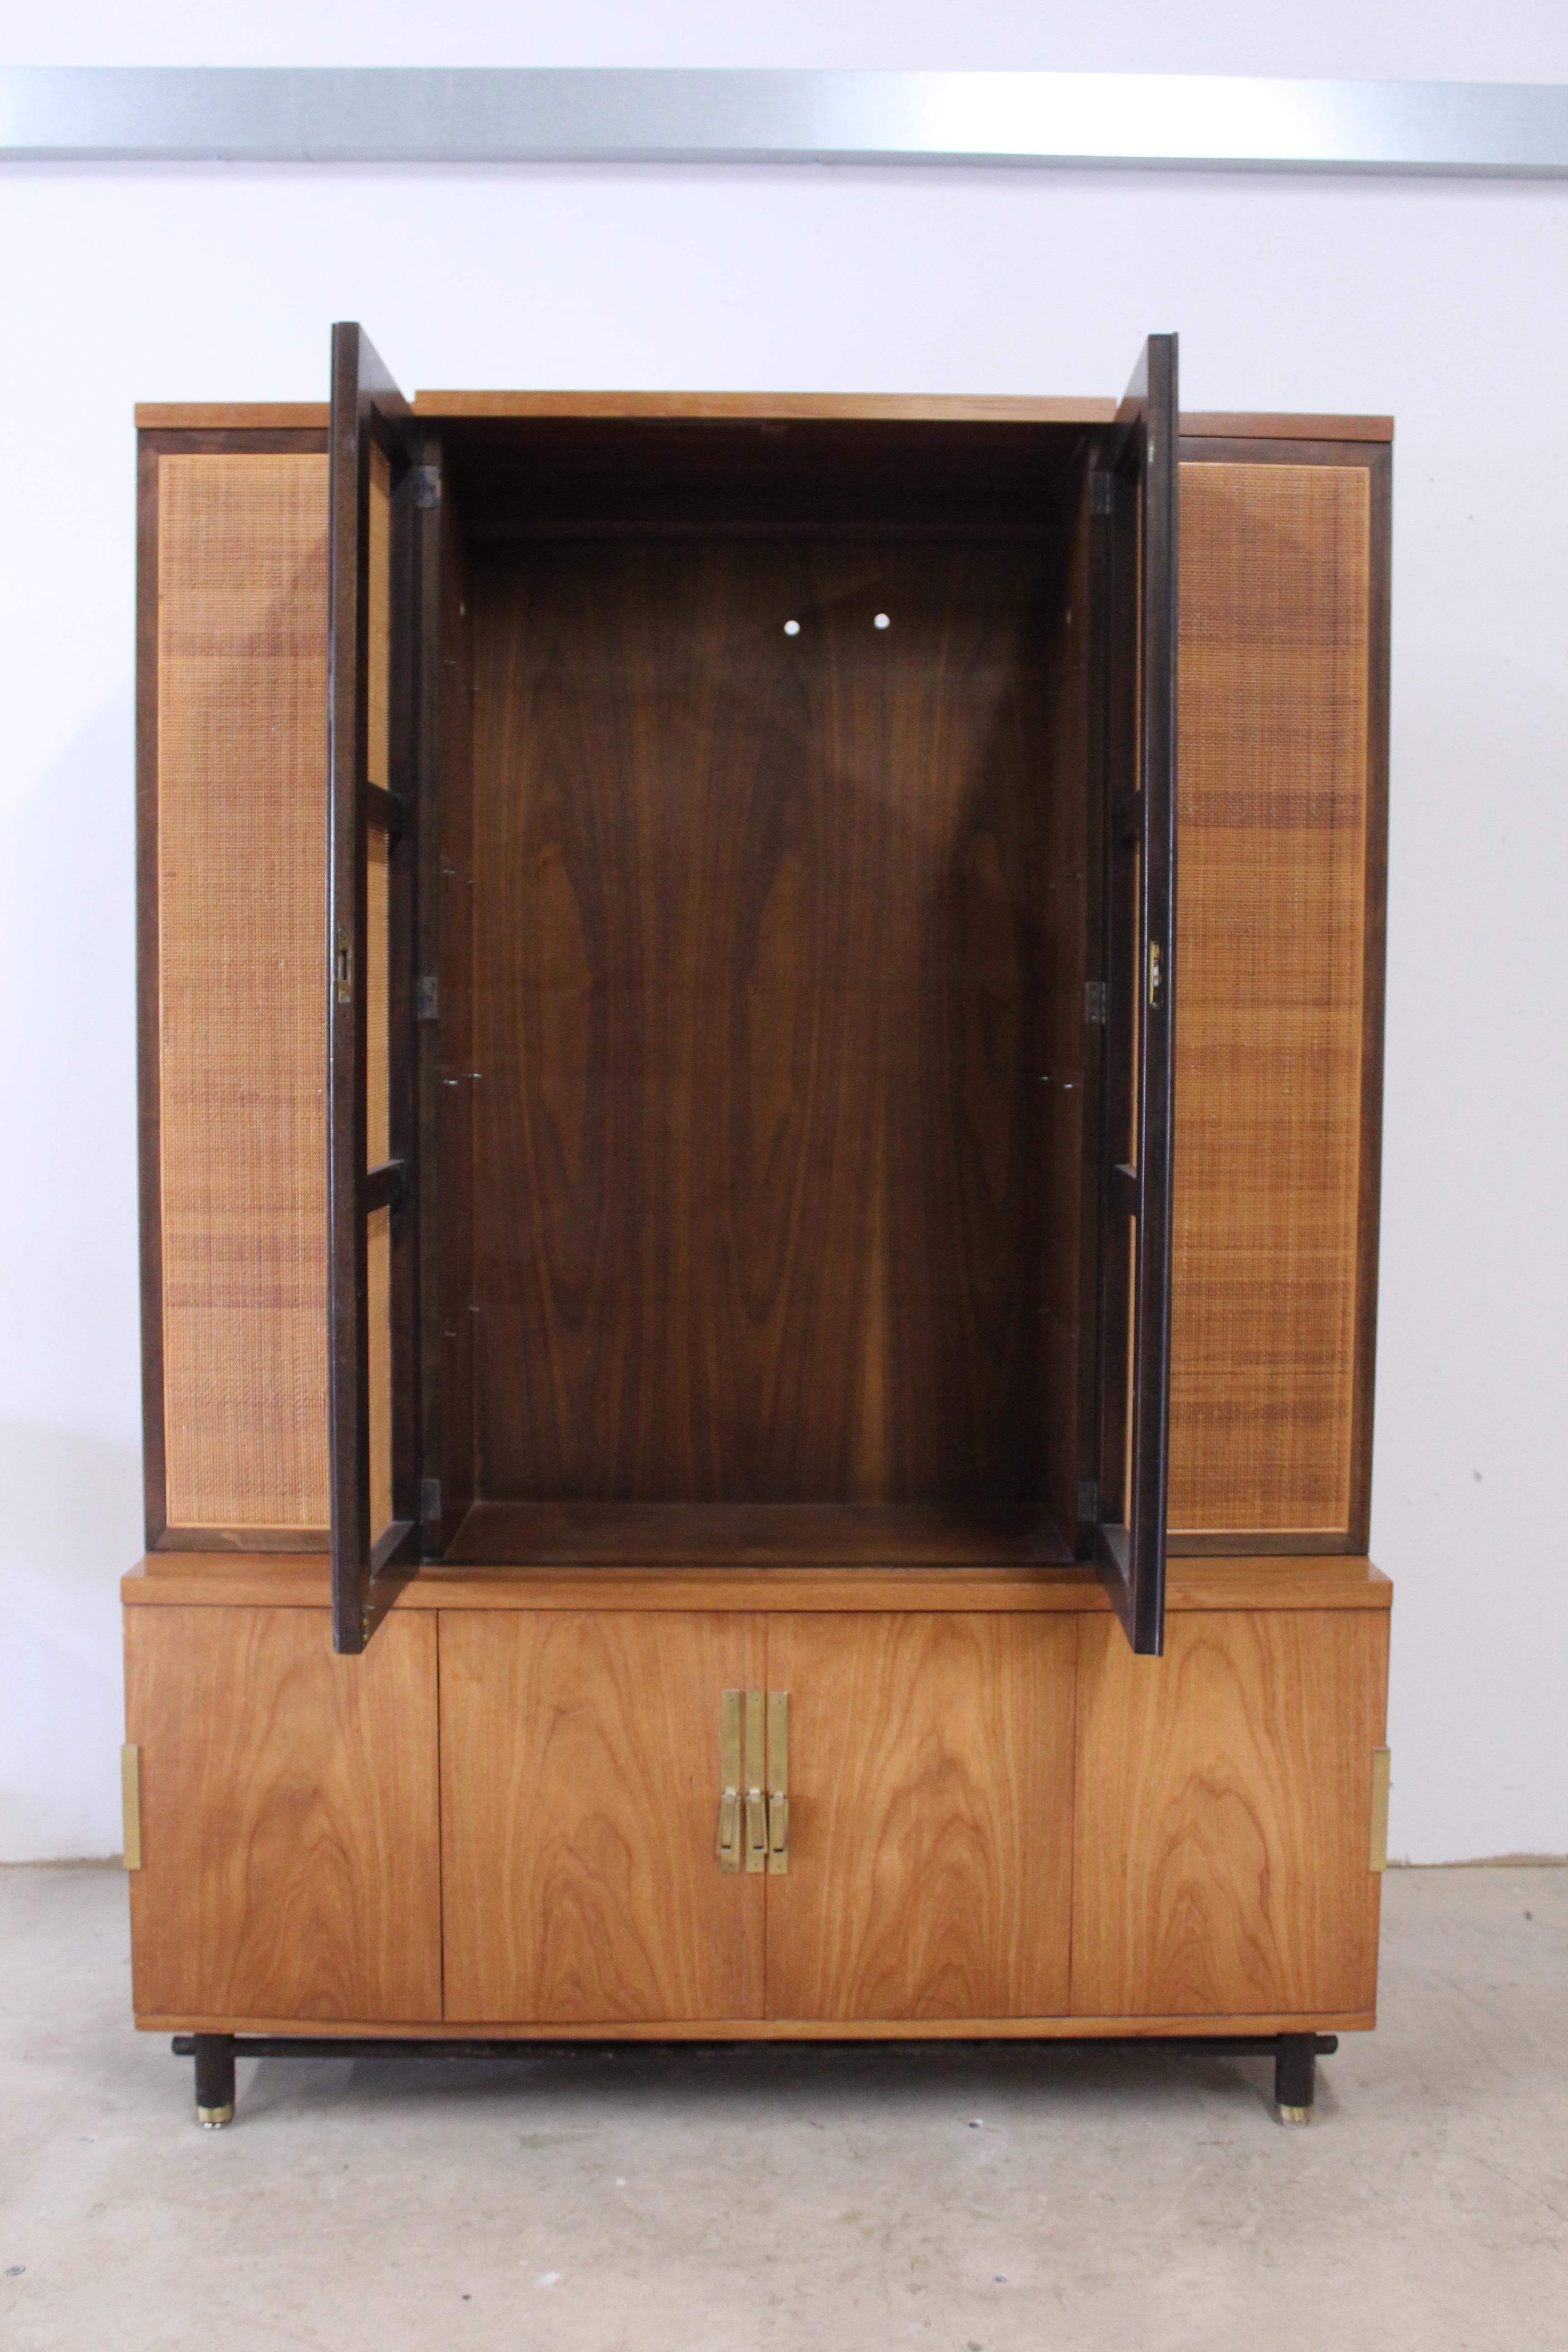 Wood Baker Furniture Michael Taylor Woven-Front Wall Unit